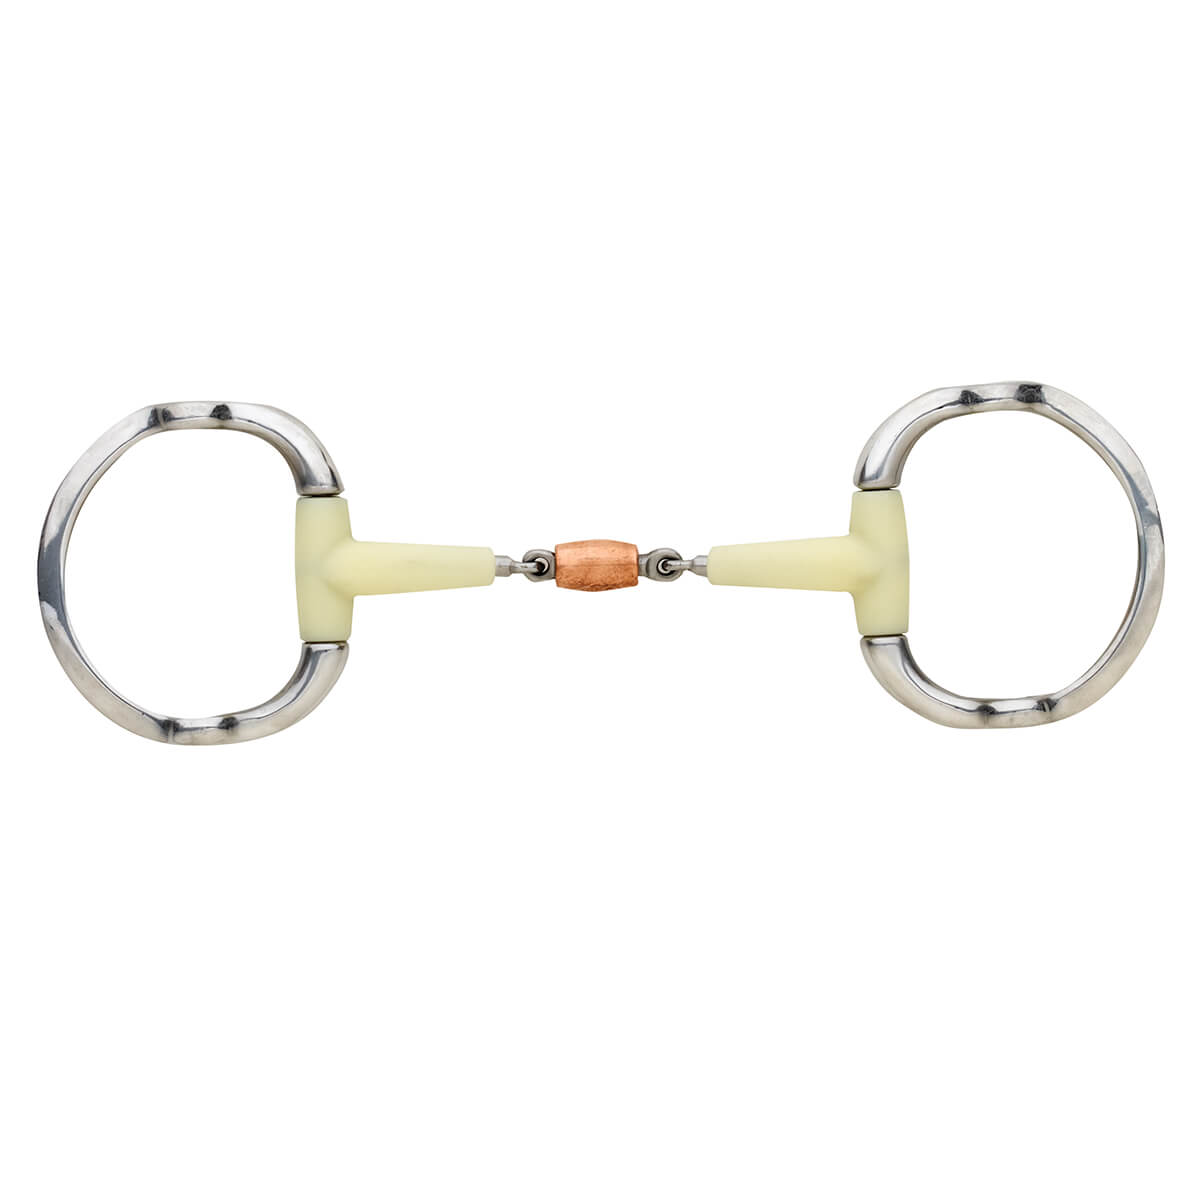 Baoblaze Horse Stainless Steel Eggbutt Snaffle Bits with Jointed Copper Mouth